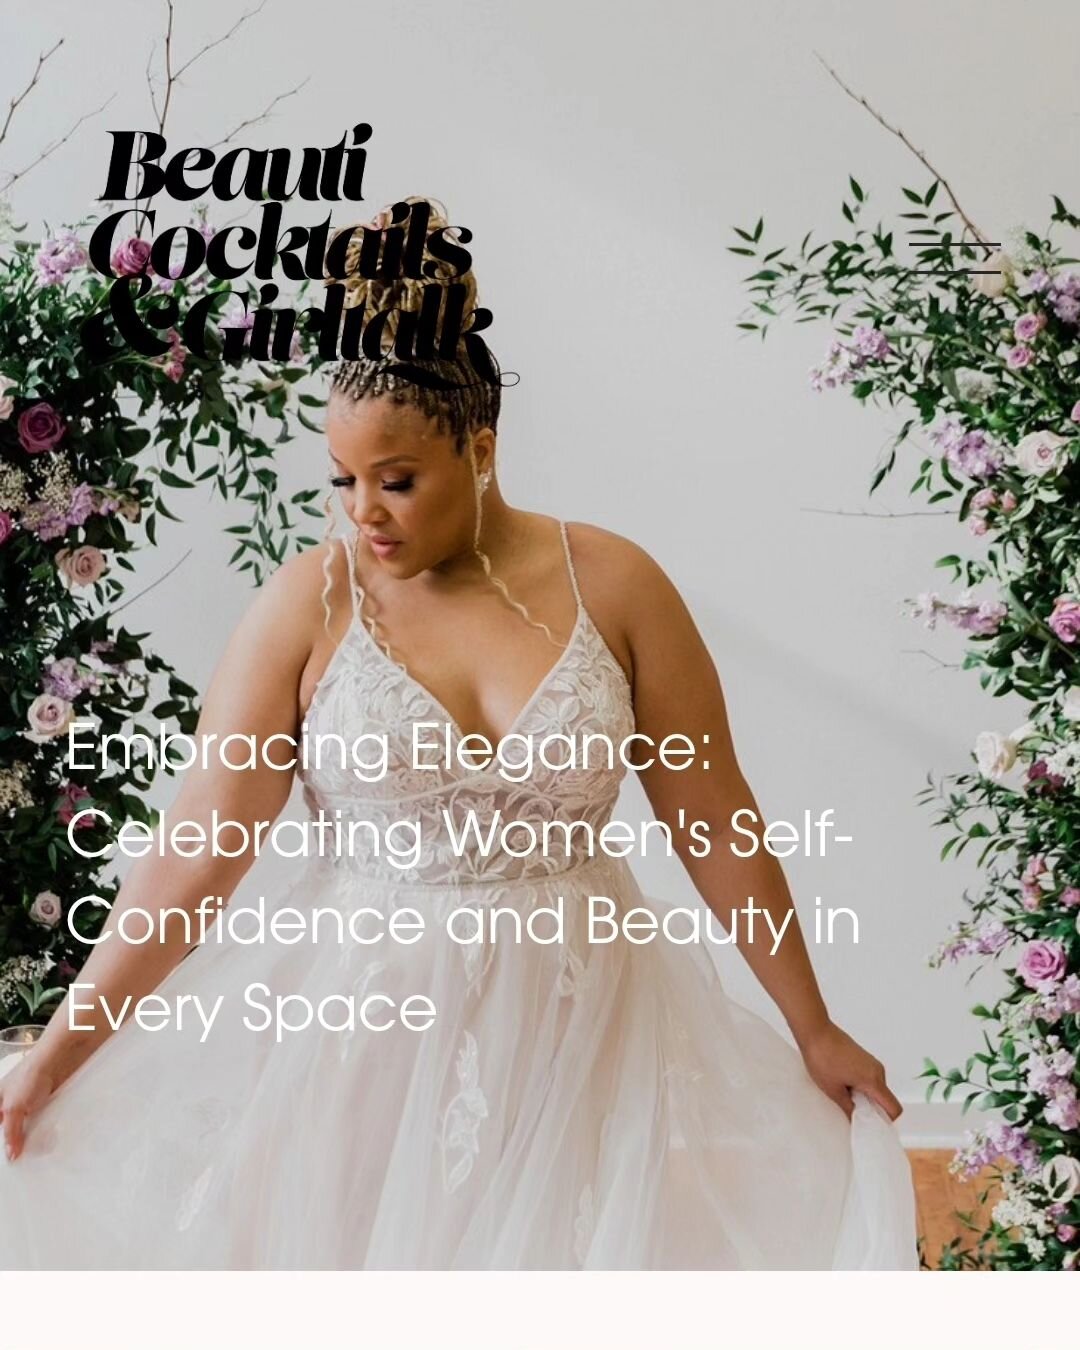 We love when our purpose and message reaches a wider audience. We know our friends here see it all the time  but we're grateful each time it reache's someone new 🤍 thank you @beauticocktailsgirltalk for the feature!

Model @sherita_ivory 
Photograph